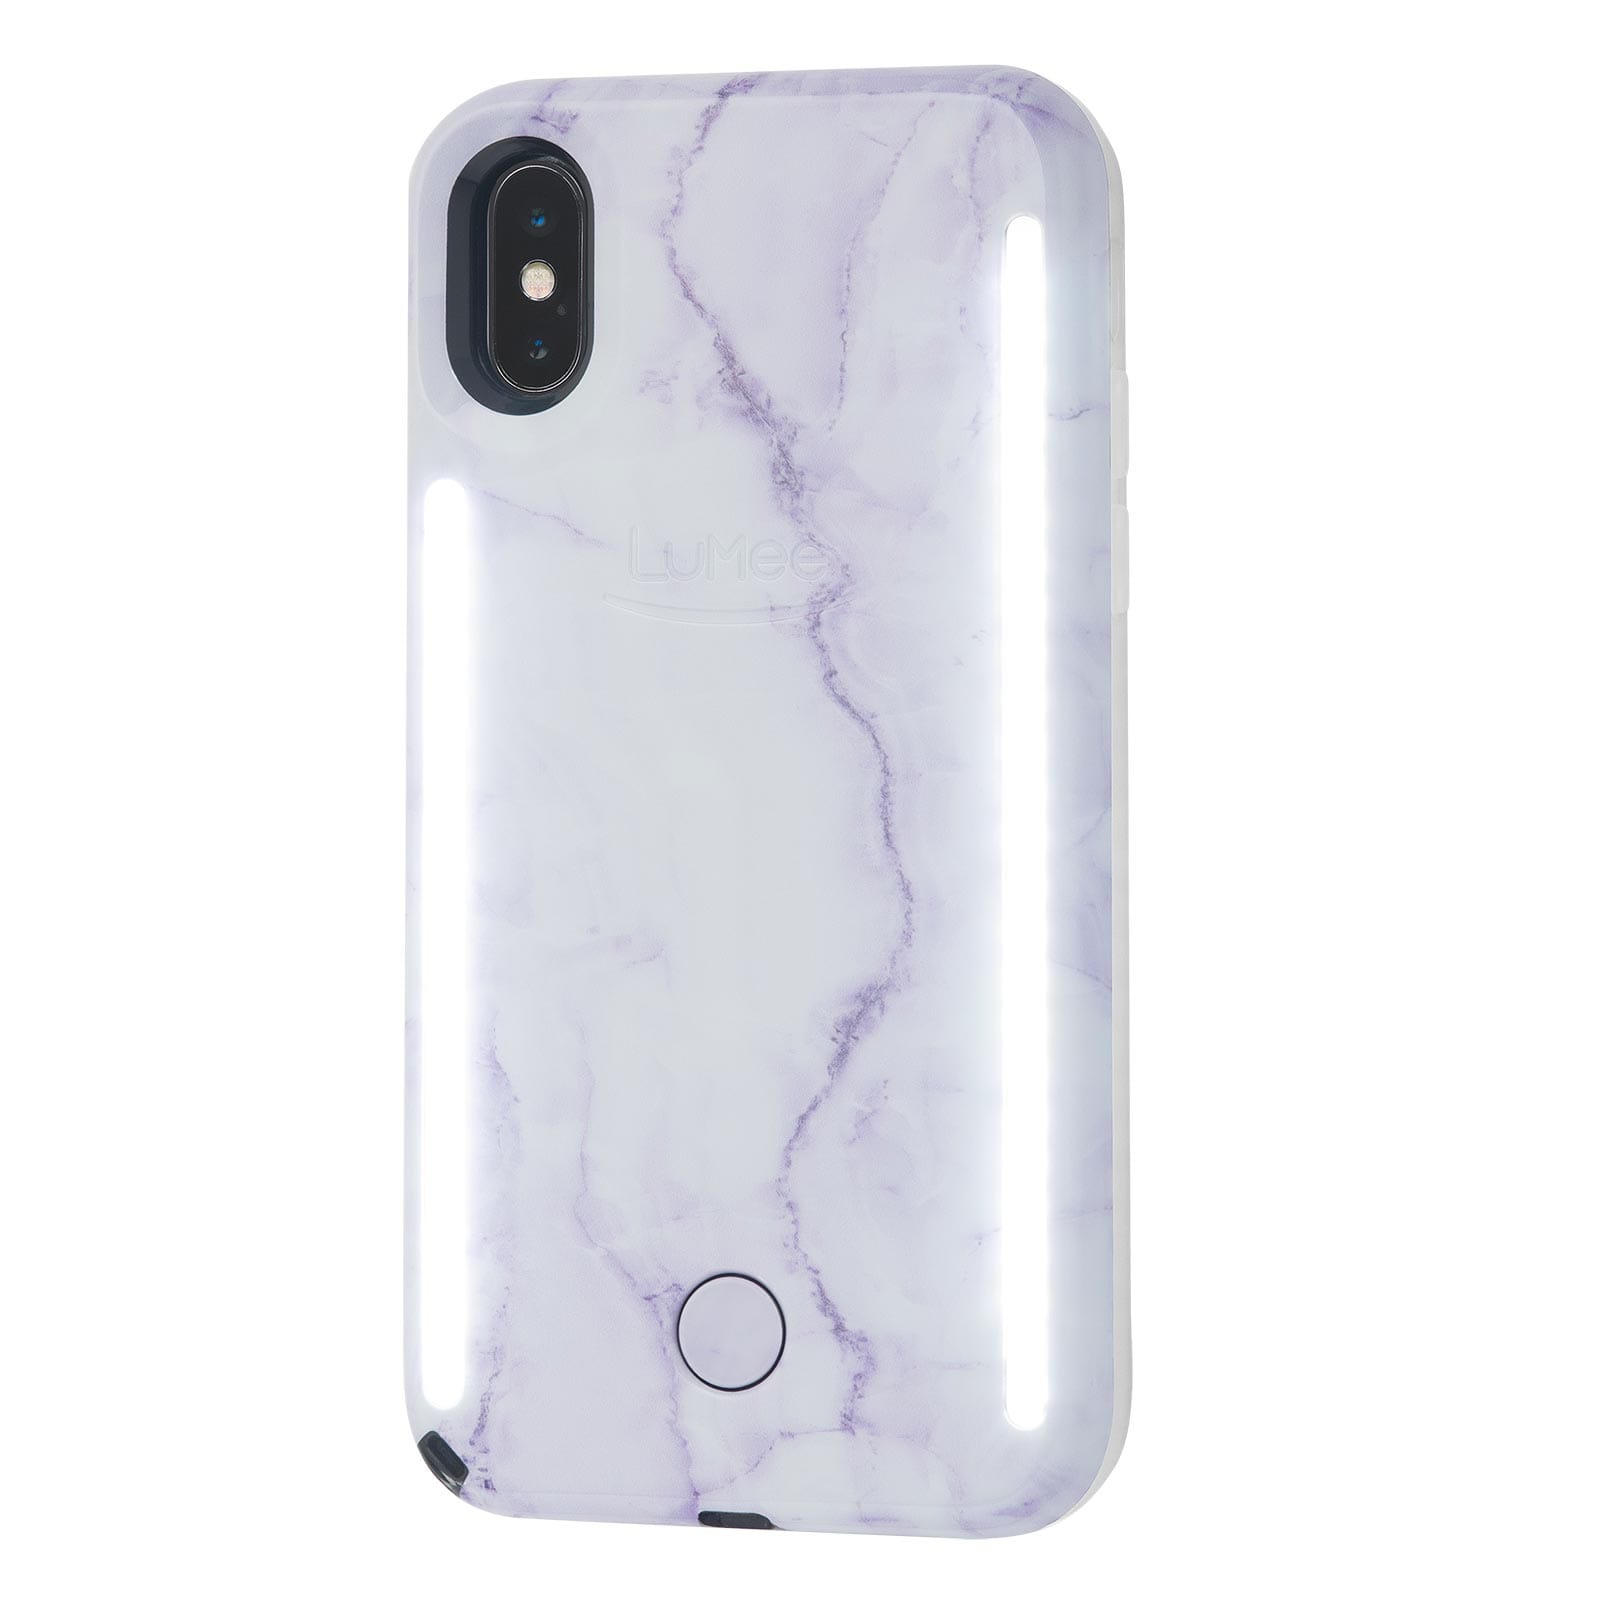 iPhone X case with purble marble pattern and built in selfie lights. color::Lavender Marble